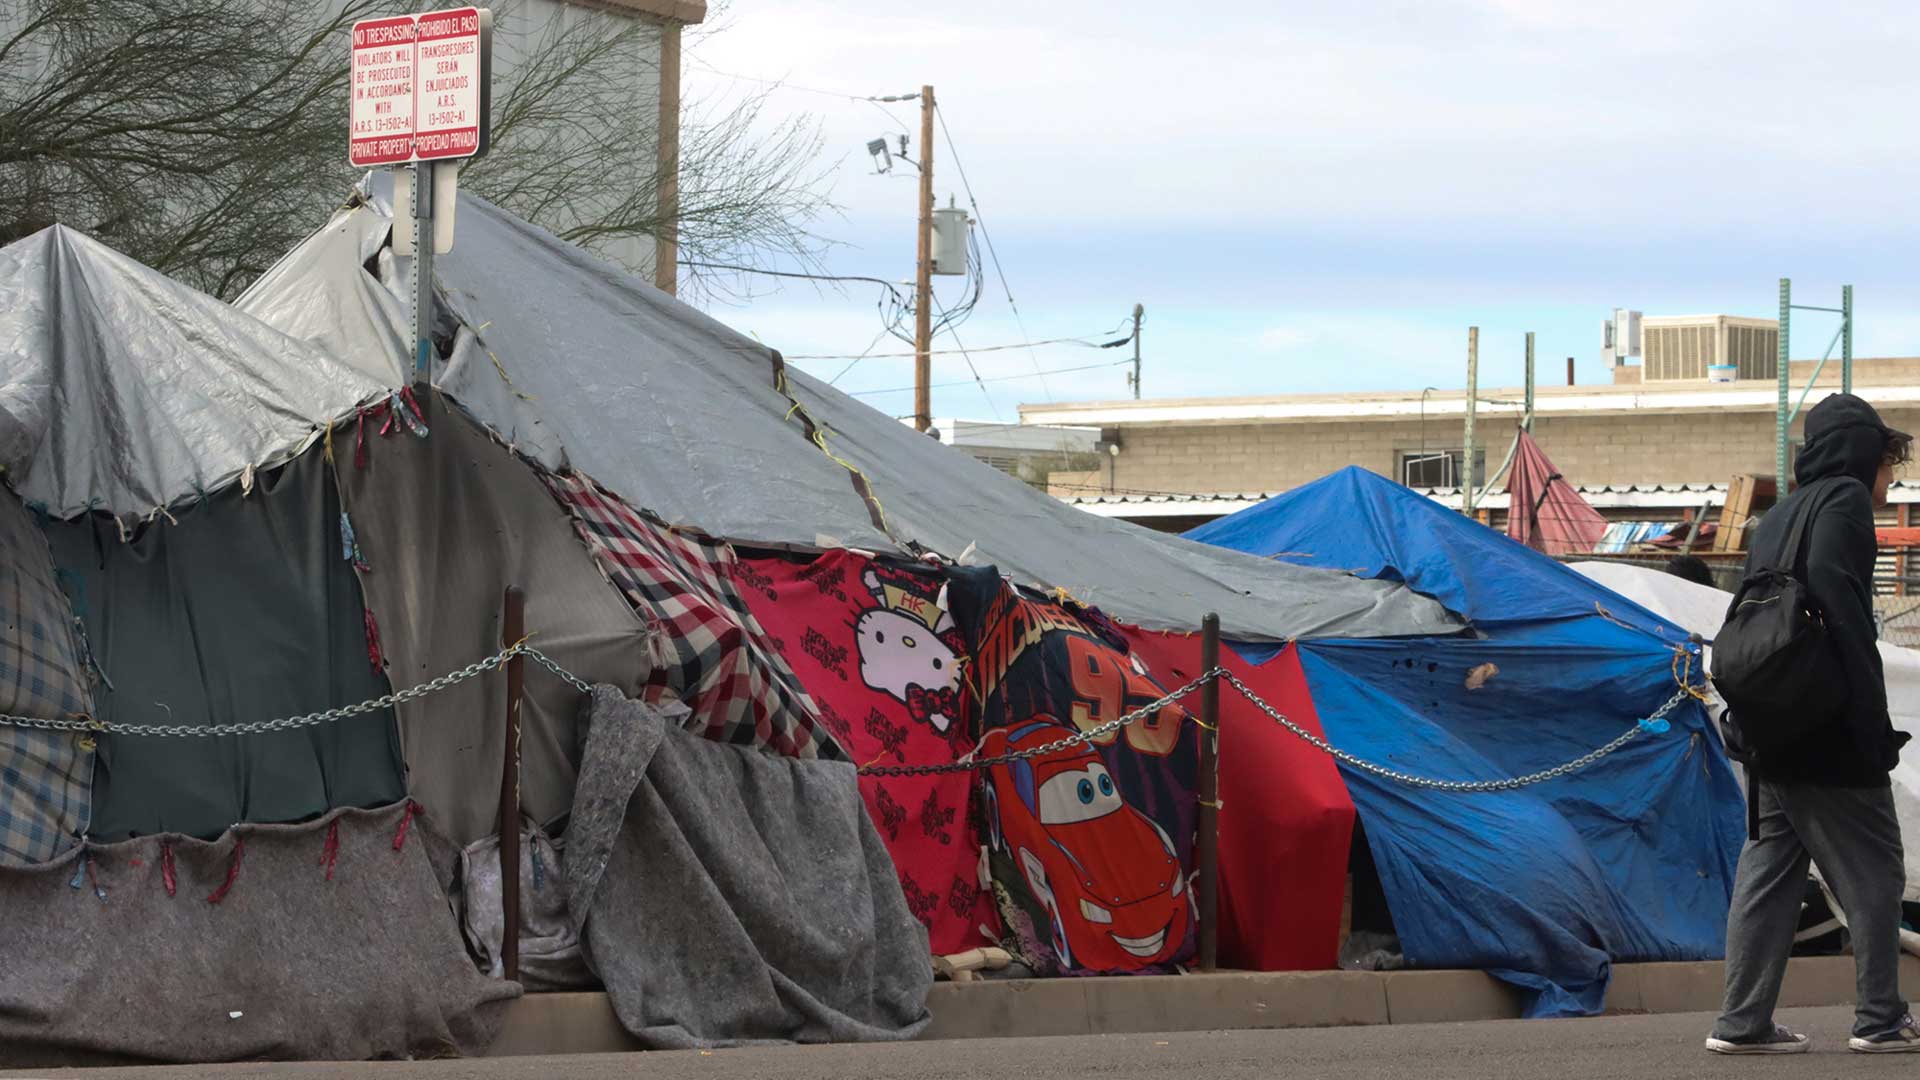 The U.S. 9th Circuit Court of Appeals ruled in 2019 that homeless people cannot be criminalized for sleeping outside if no alternatives exist.